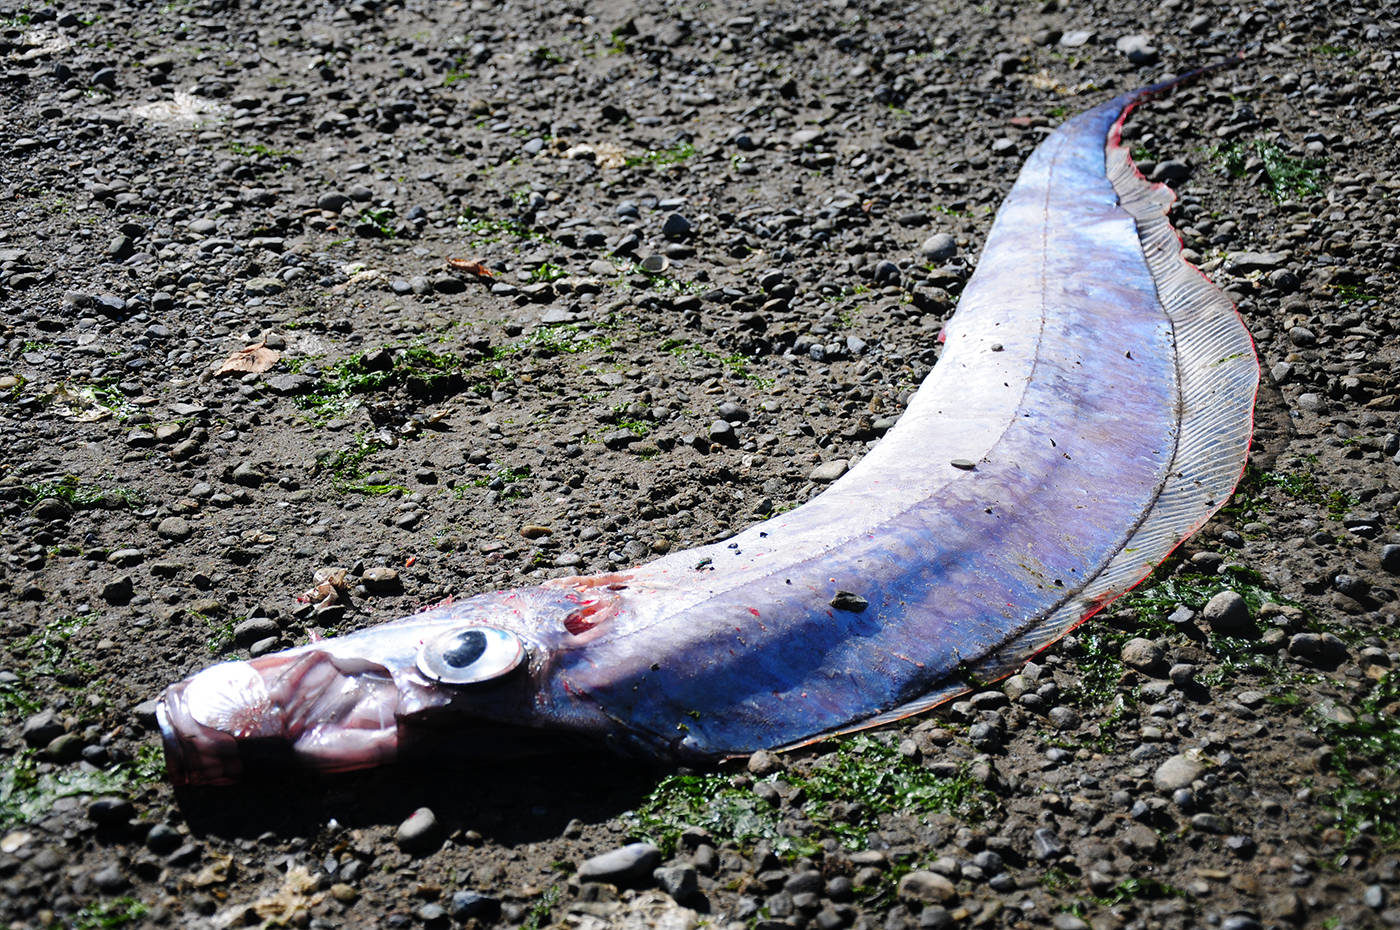 The strange fish was nearly three meters long and had no scales to be seen.